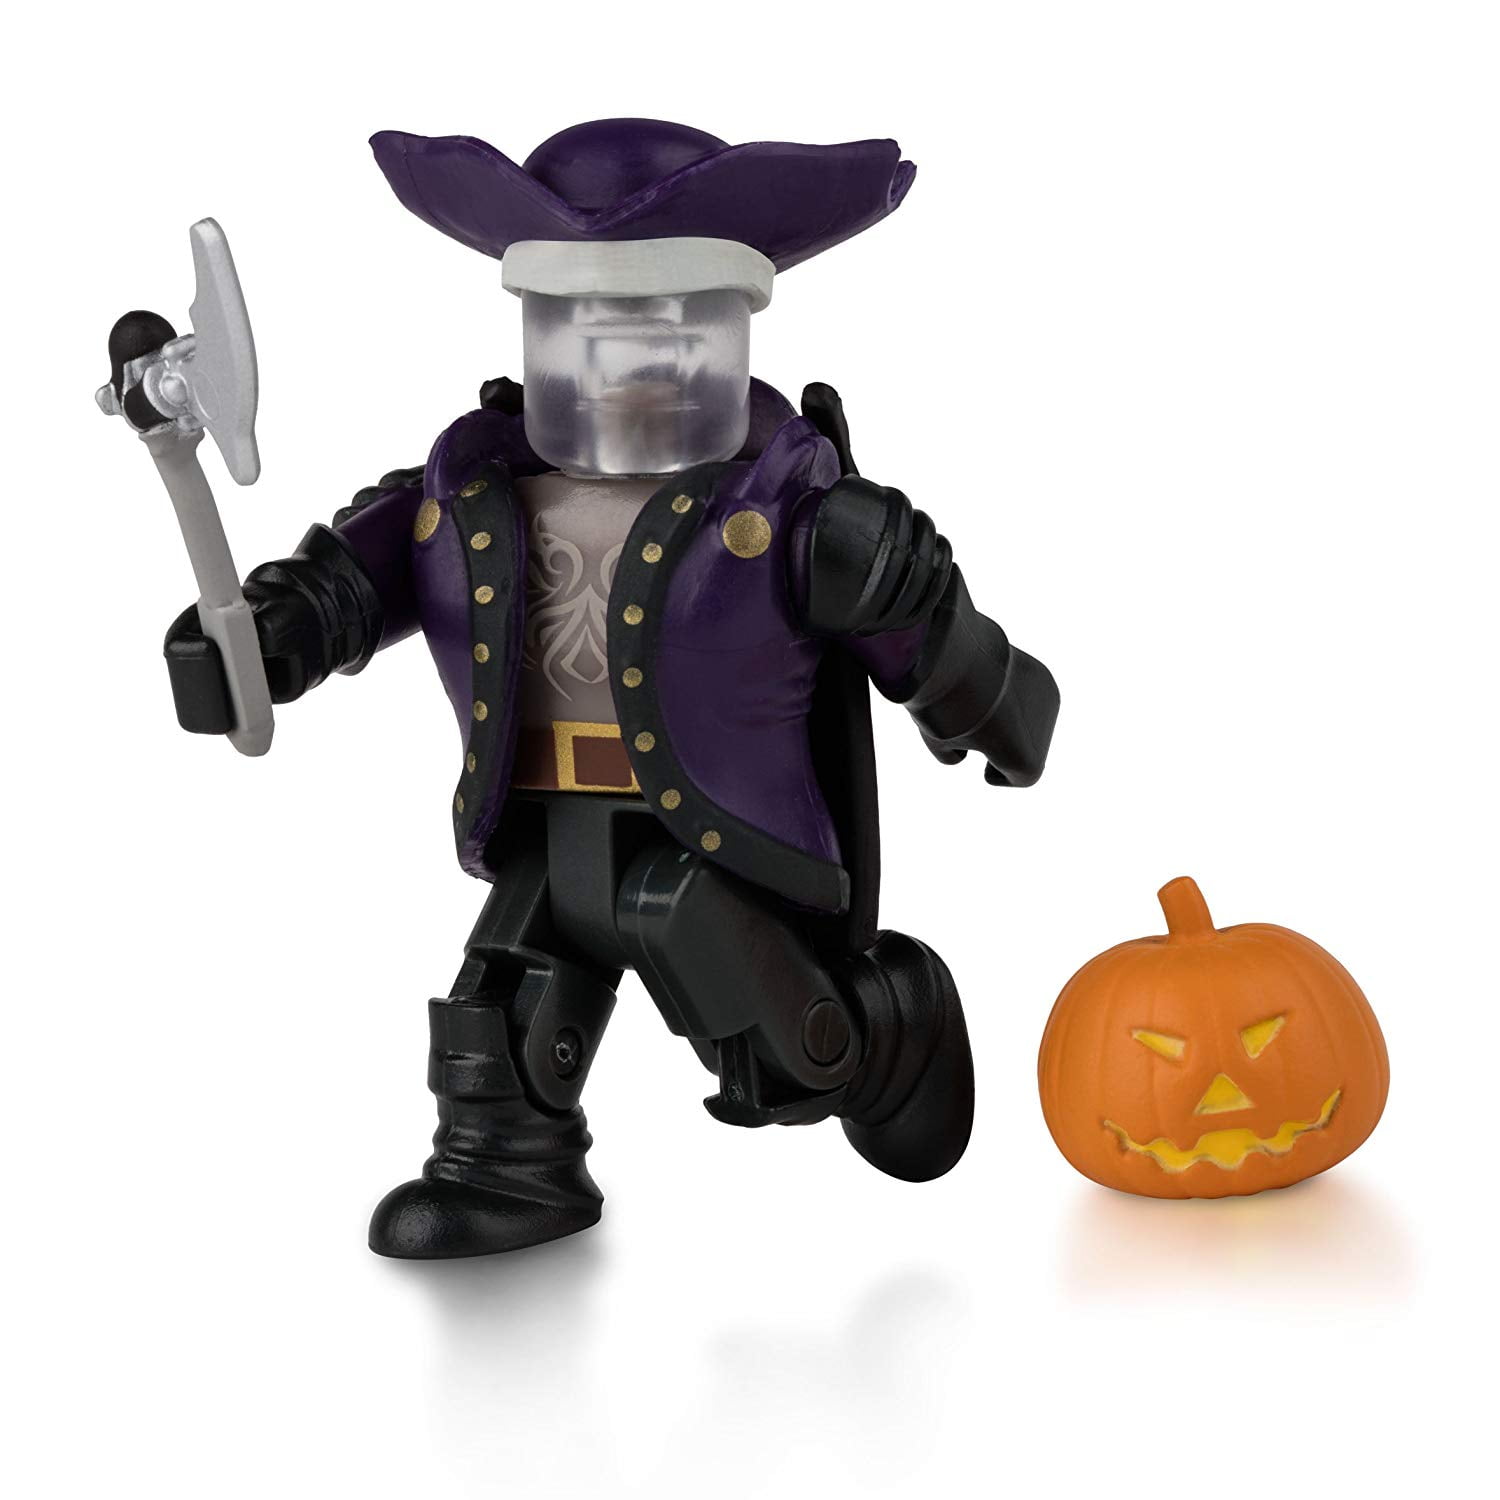 Headless Horseman Figure With Exclusive Virtual Item Game Code Roblox Headless Horseman Figure Packwalmartes With One Figure Accessories And Collector S Checklist By Roblox Walmart Com Walmart Com - roblox guitar songs jack o mask roblox free